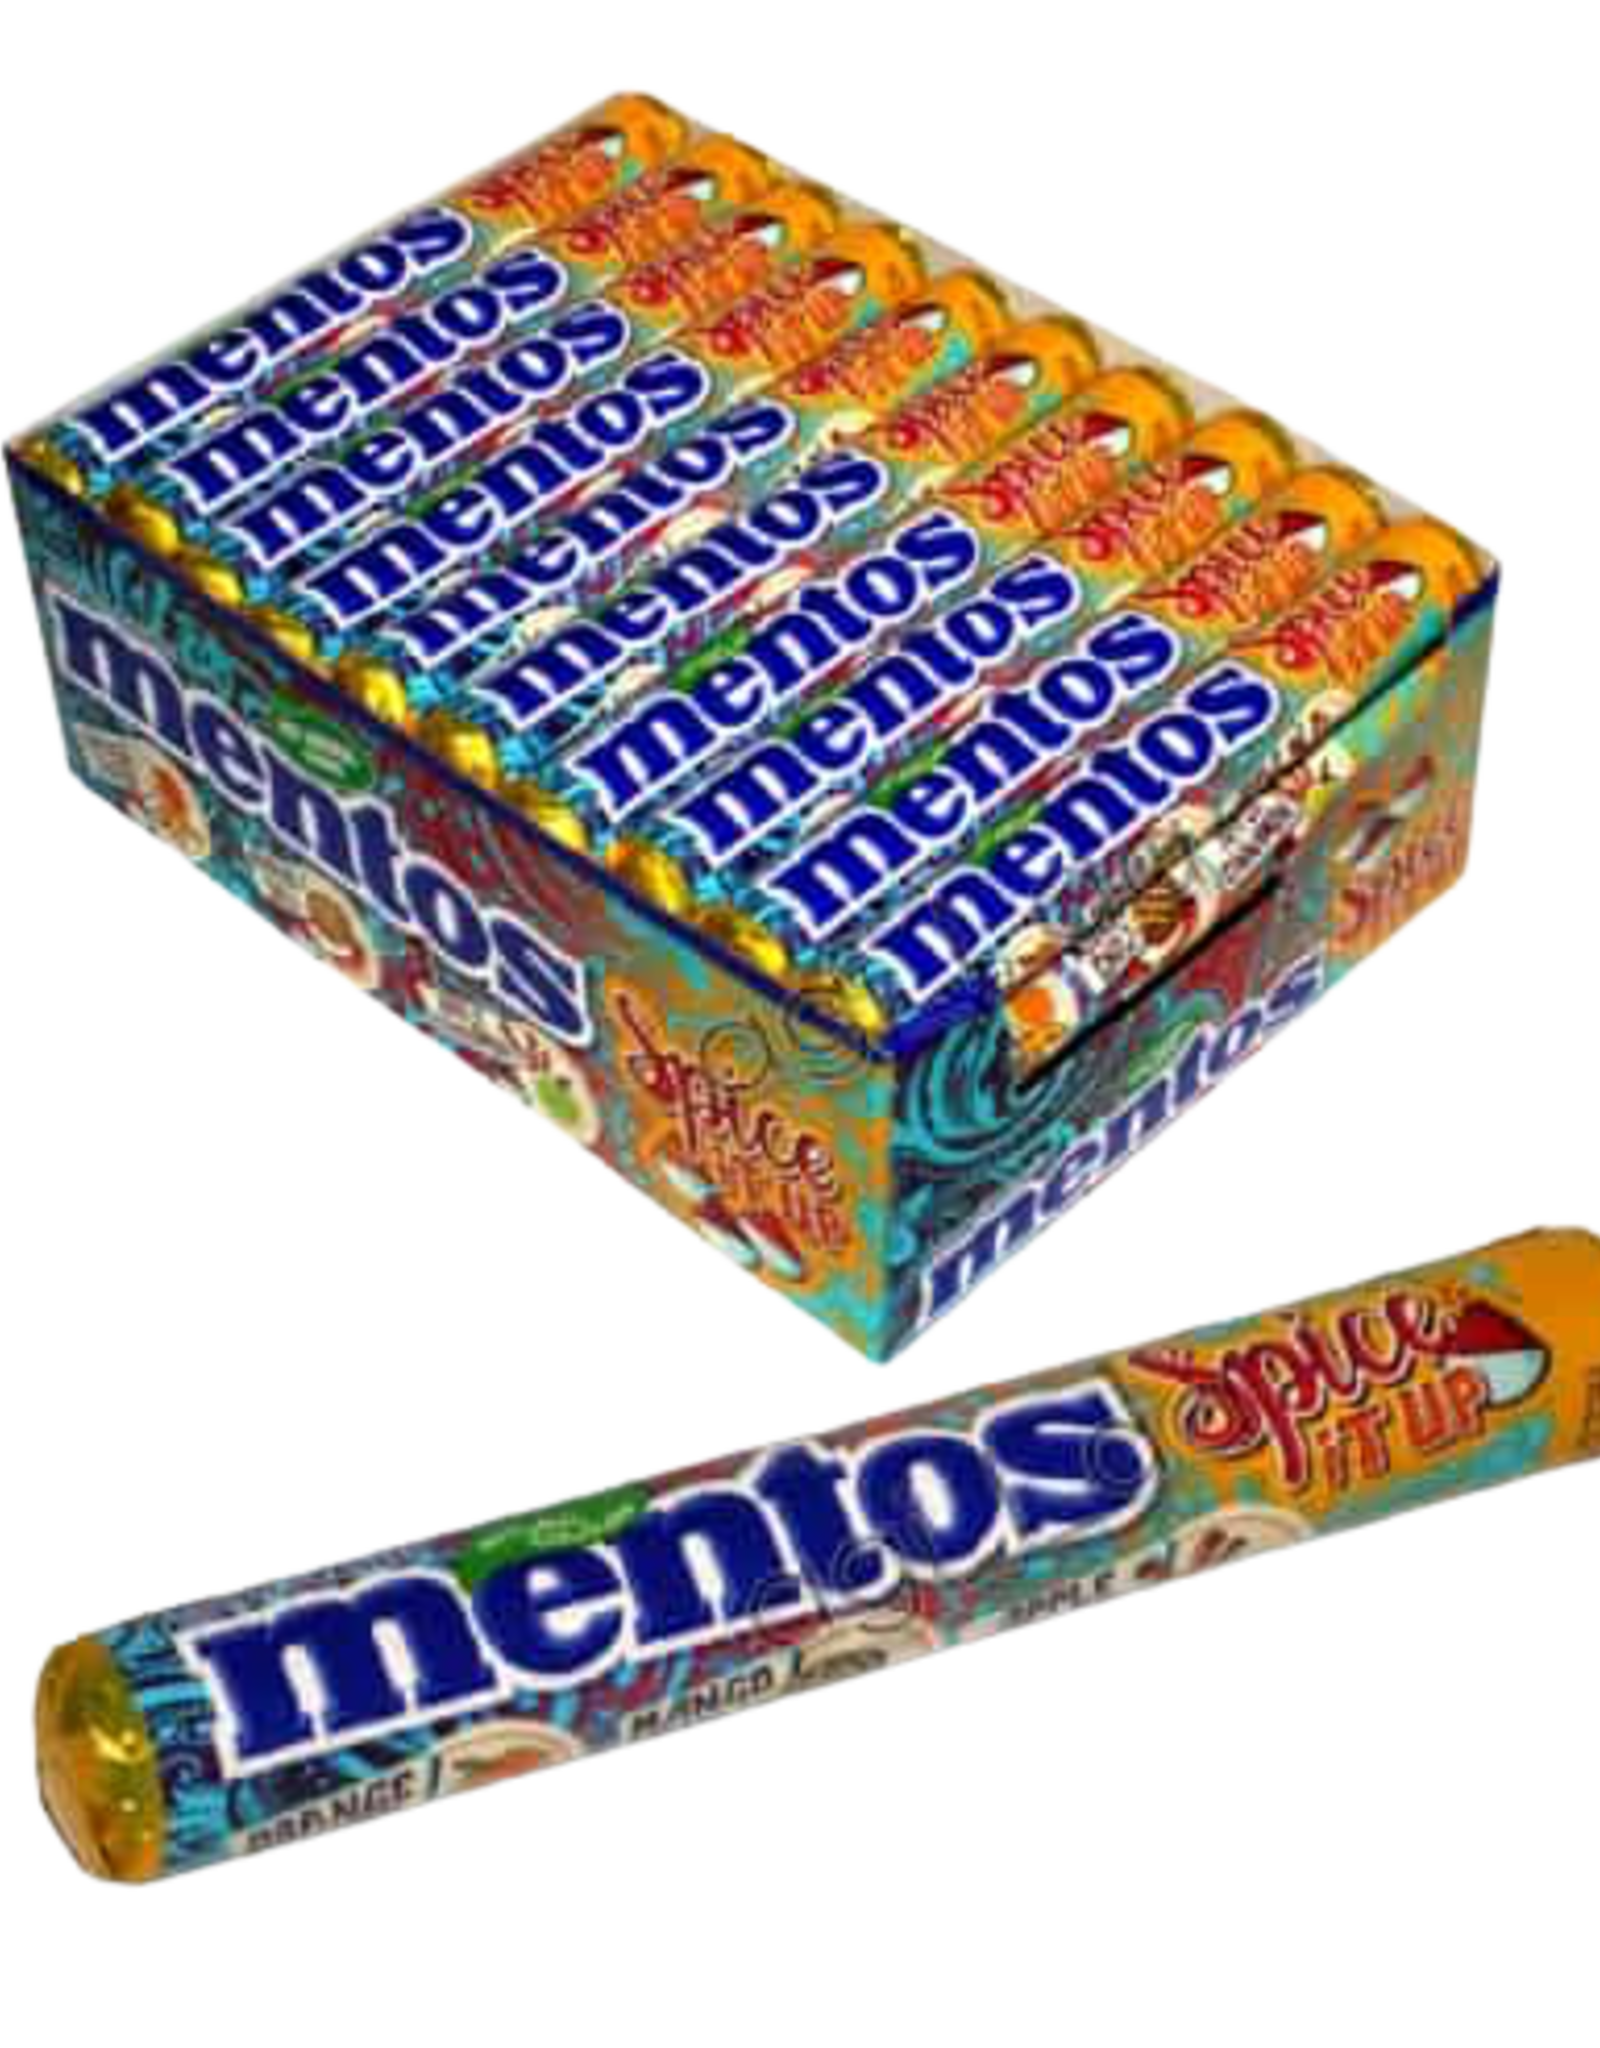 Europe Mentos Spice it Up